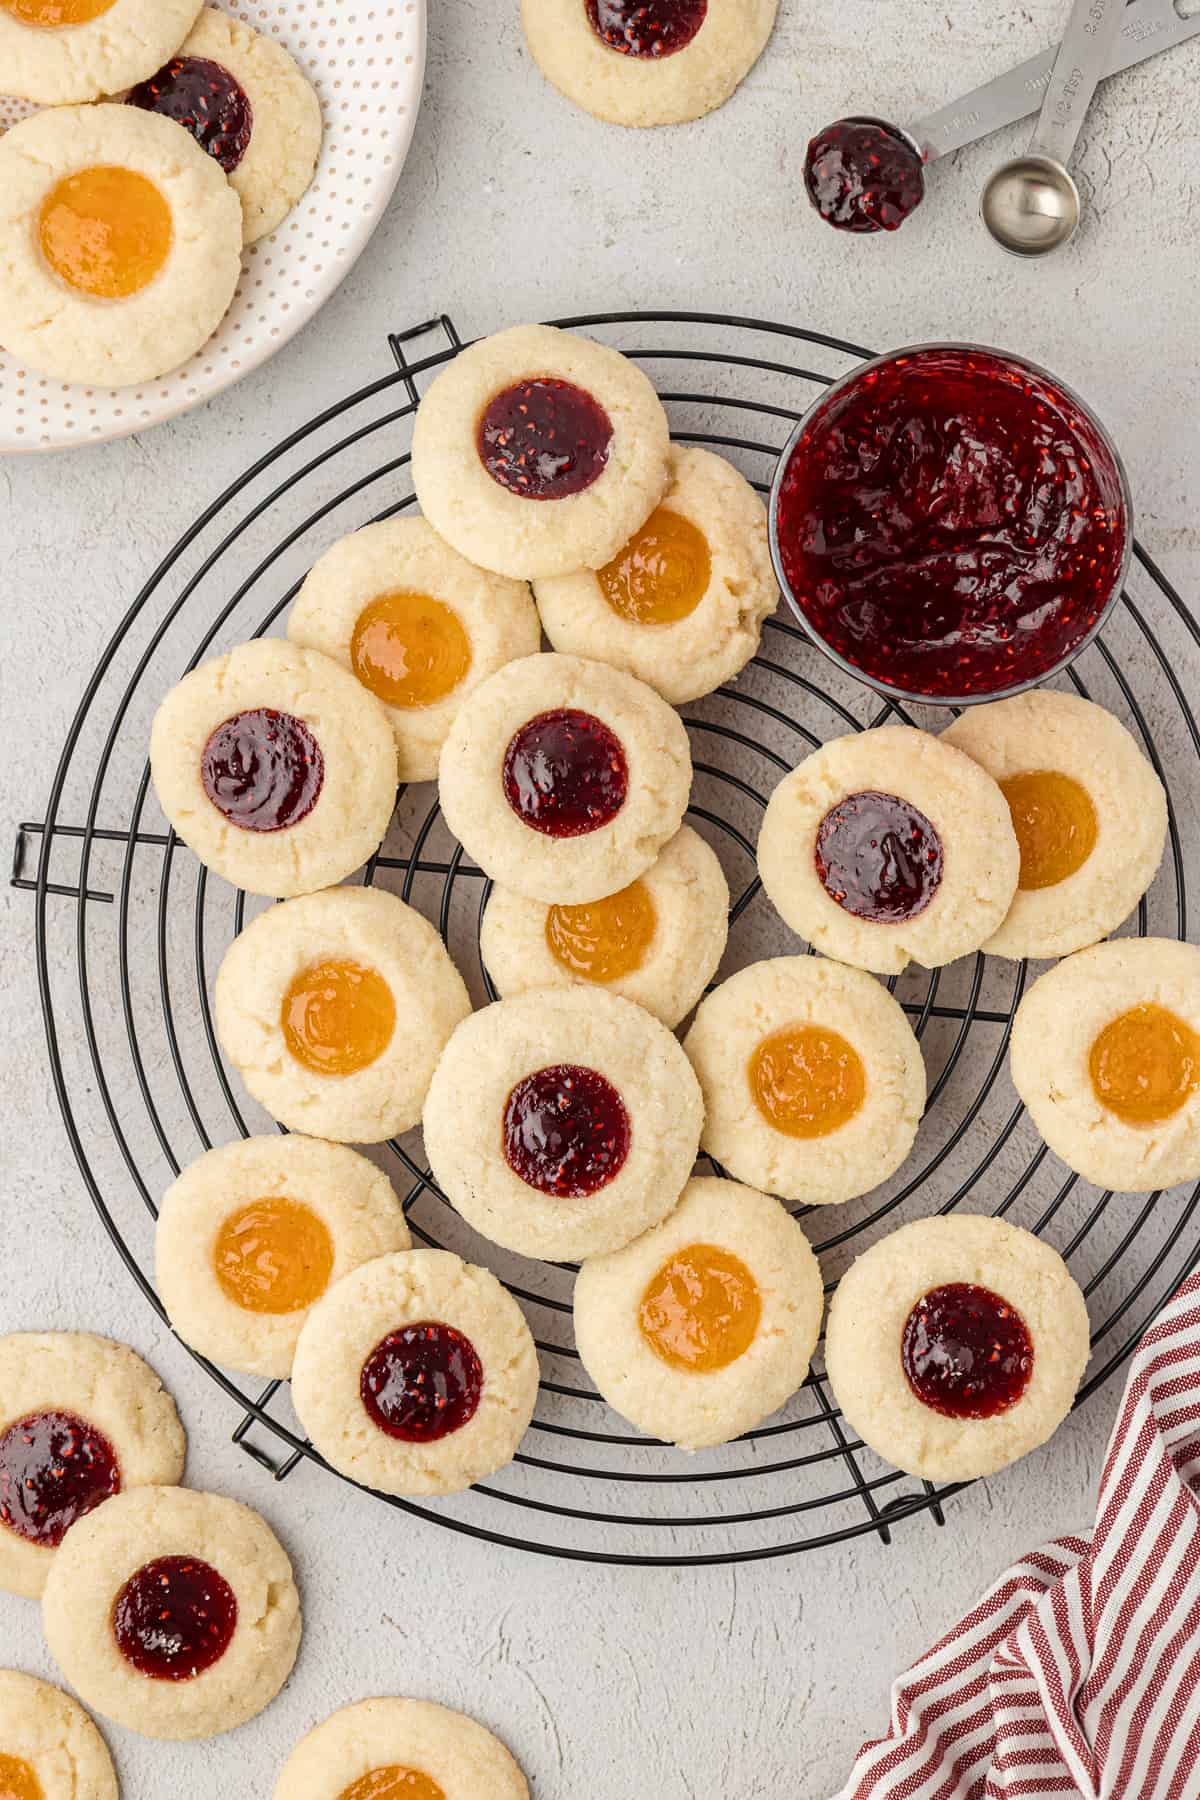 apricot and raspberry jam thumbprint cookies scattered on a wire rack beside a jar of raspberry jam, with more cookies scattered around, a plate of cookies, measuring spoons and a red and white striped towel